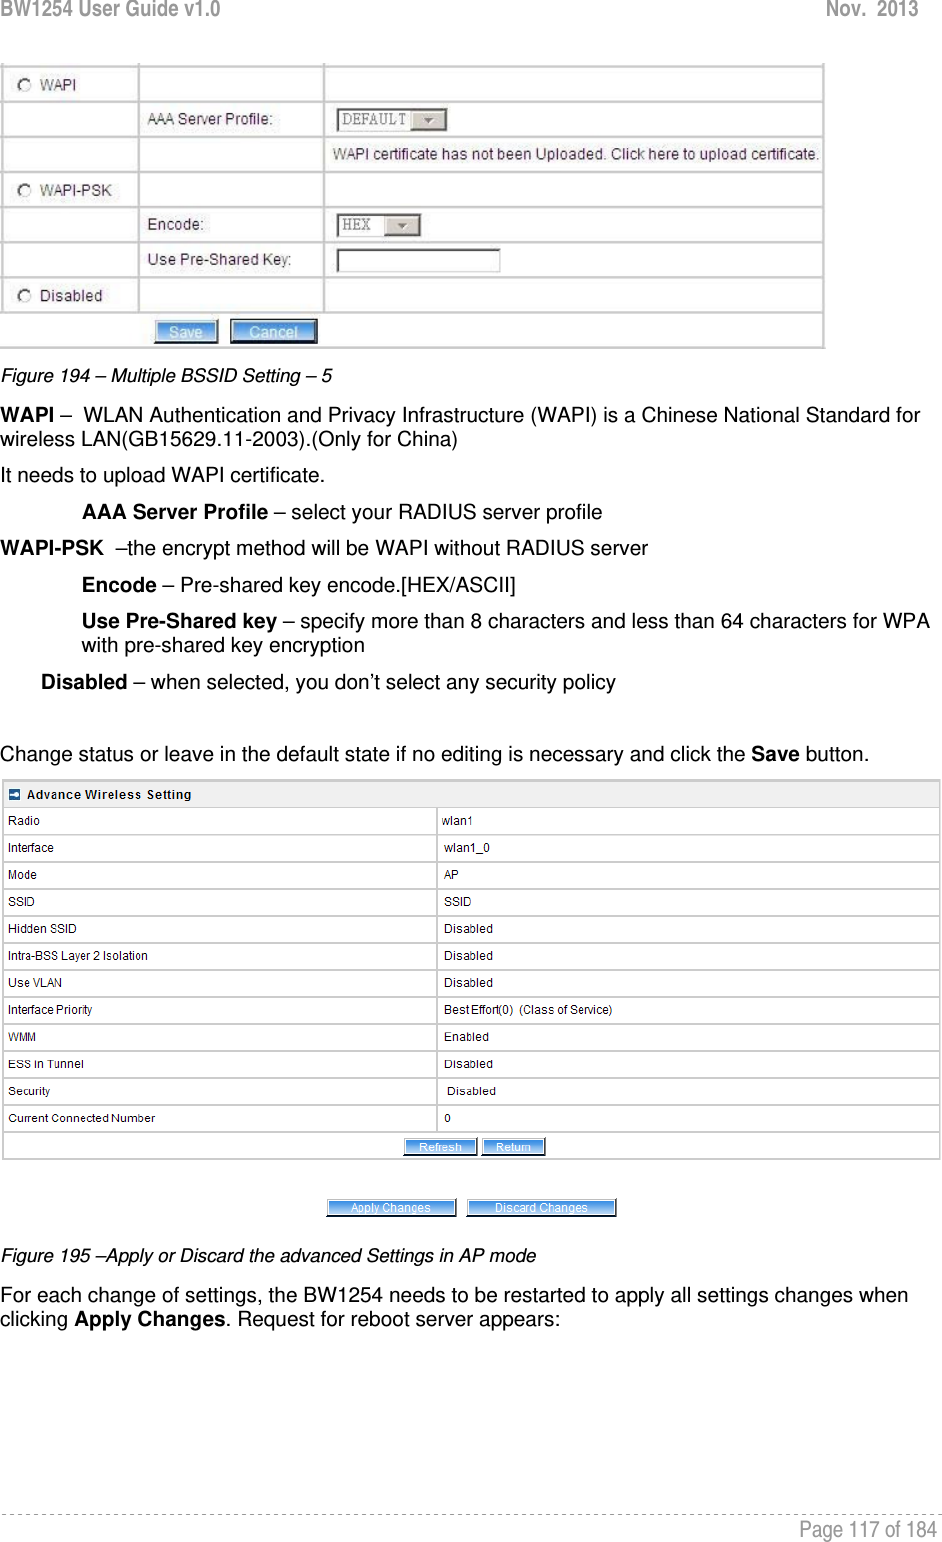 BW1254 User Guide v1.0  Nov.  2013     Page 117 of 184    Figure 194 – Multiple BSSID Setting – 5 WAPI –  WLAN Authentication and Privacy Infrastructure (WAPI) is a Chinese National Standard for wireless LAN(GB15629.11-2003).(Only for China) It needs to upload WAPI certificate. AAA Server Profile – select your RADIUS server profile WAPI-PSK  –the encrypt method will be WAPI without RADIUS server Encode – Pre-shared key encode.[HEX/ASCII] Use Pre-Shared key – specify more than 8 characters and less than 64 characters for WPA with pre-shared key encryption Disabled – when selected, you don’t select any security policy  Change status or leave in the default state if no editing is necessary and click the Save button.   Figure 195 –Apply or Discard the advanced Settings in AP mode For each change of settings, the BW1254 needs to be restarted to apply all settings changes when clicking Apply Changes. Request for reboot server appears: 